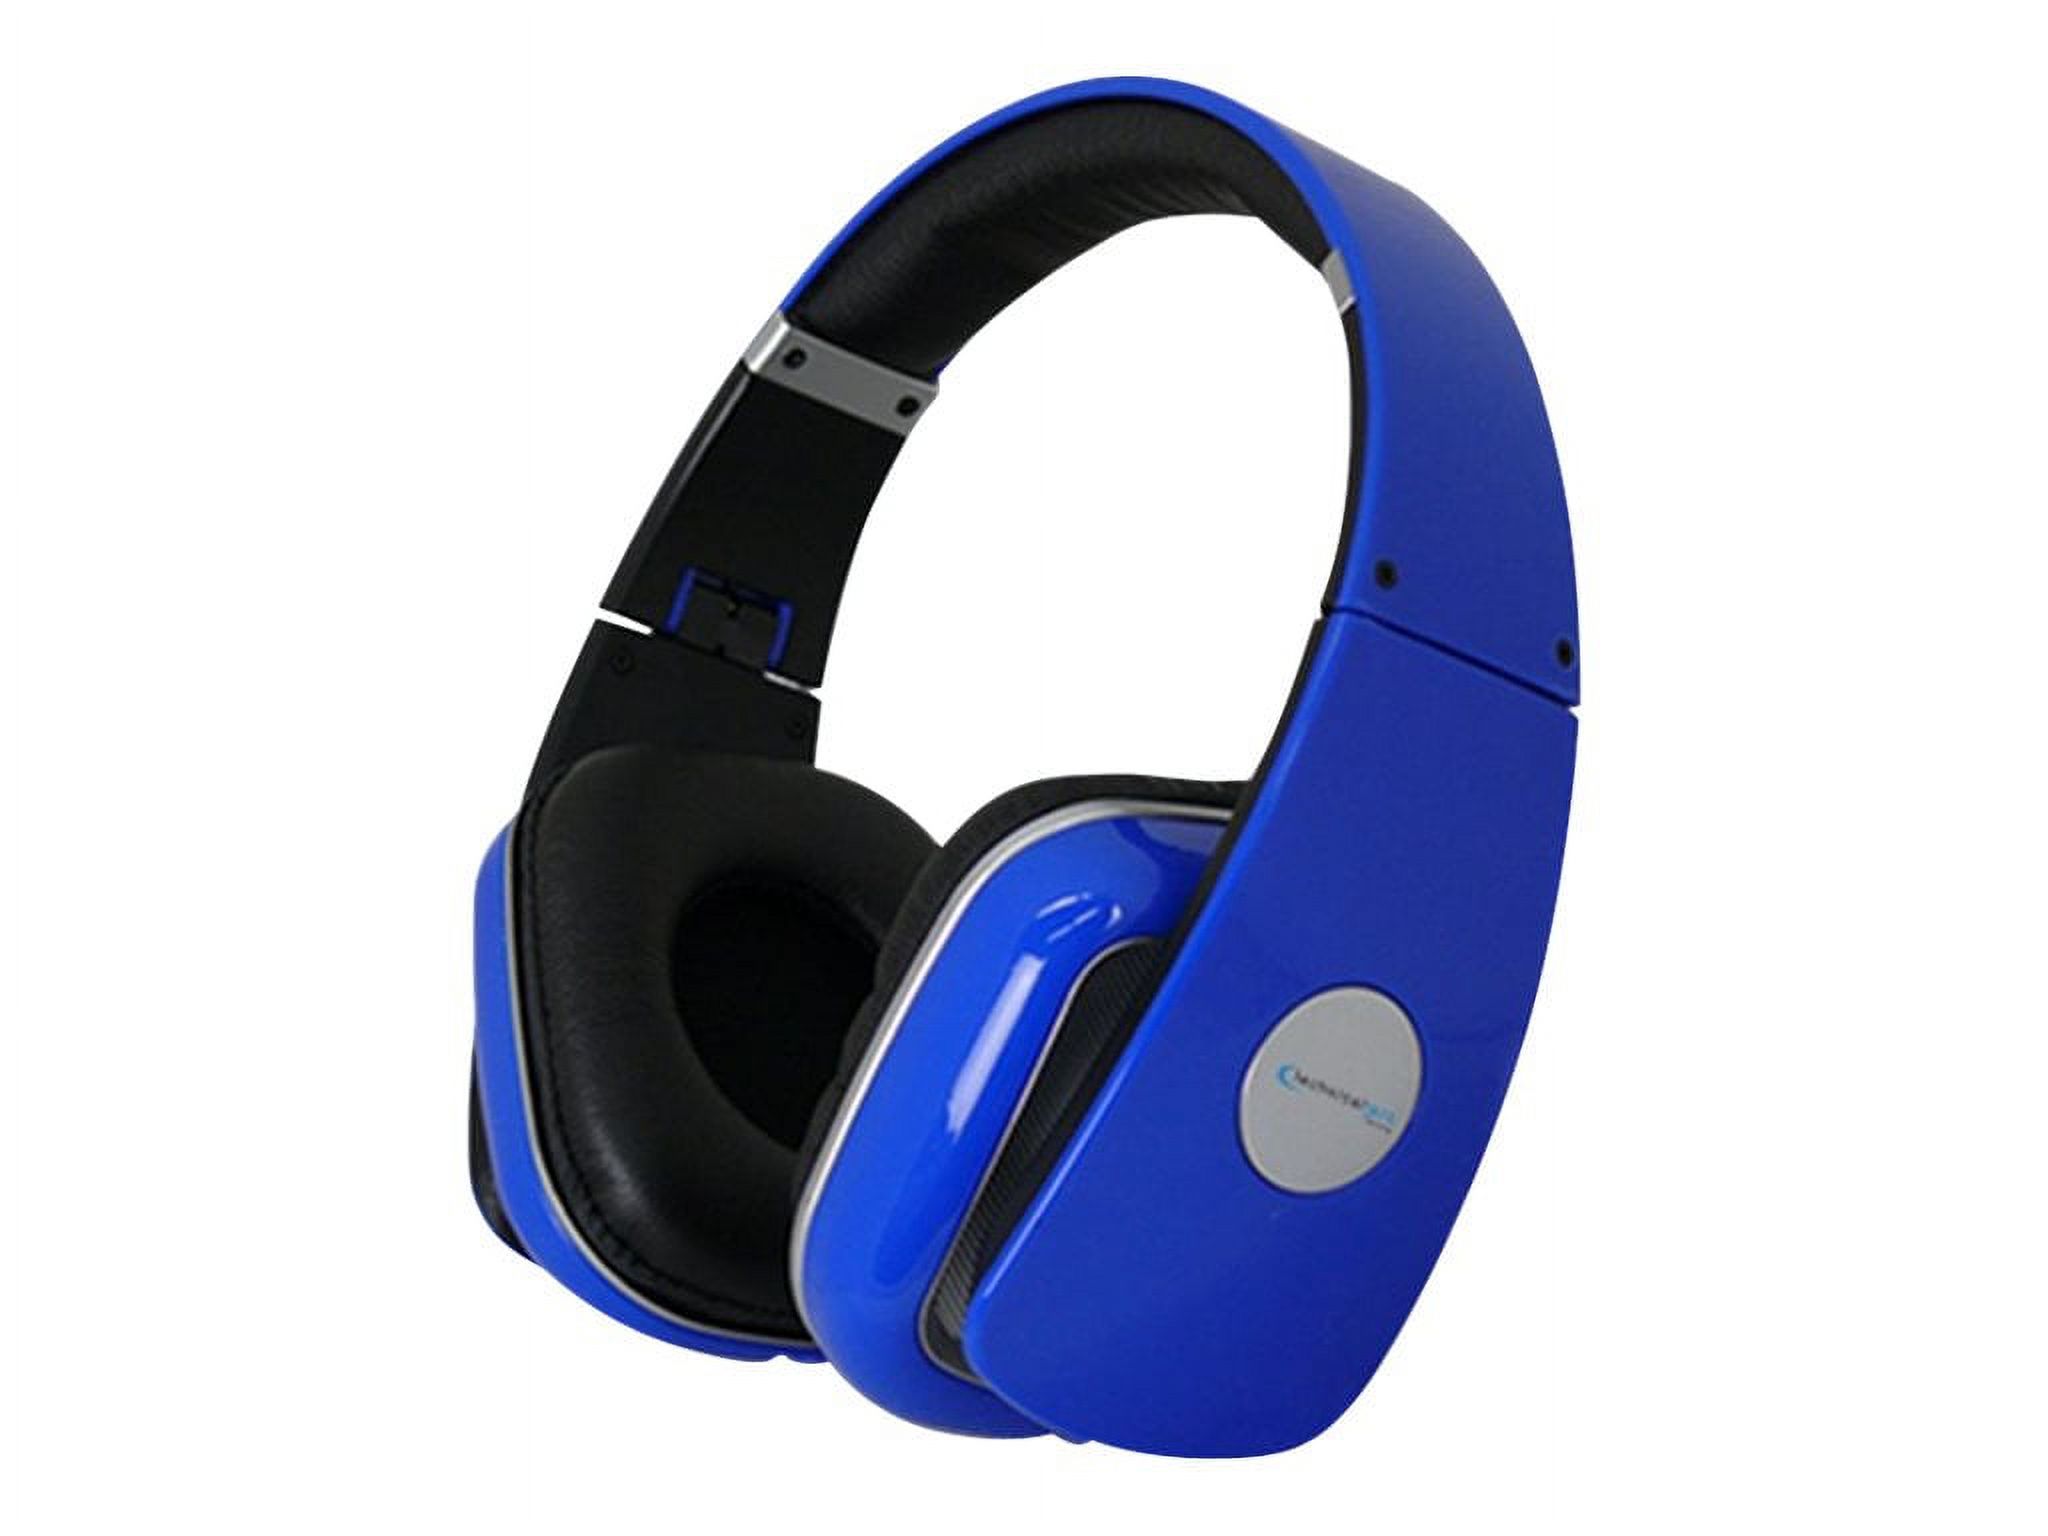 Technical Pro HP630 - Headphones with mic - on-ear - wired - 3.5 mm jack - blue - image 1 of 2